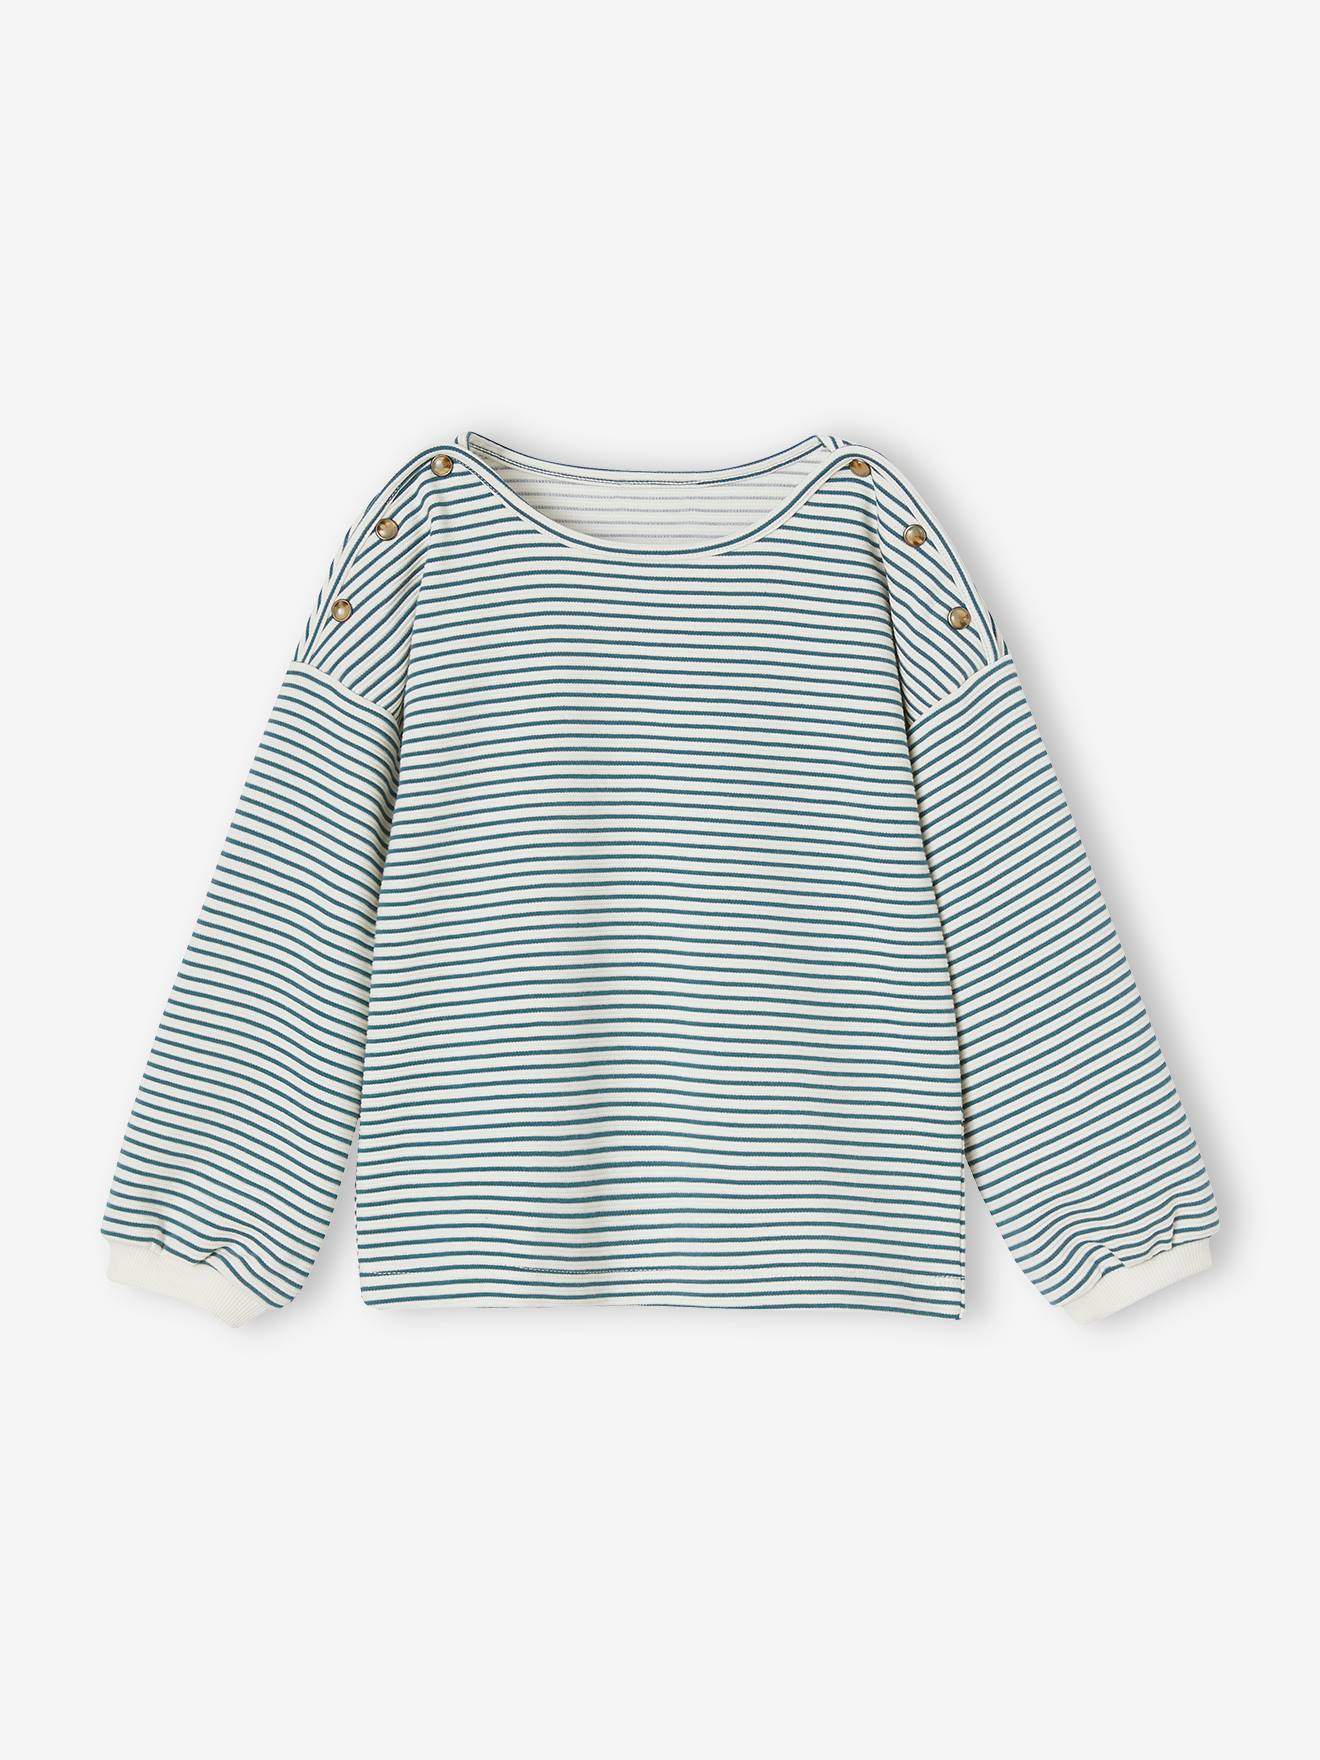 Striped Top, Boat-Neck, for Girls striped green